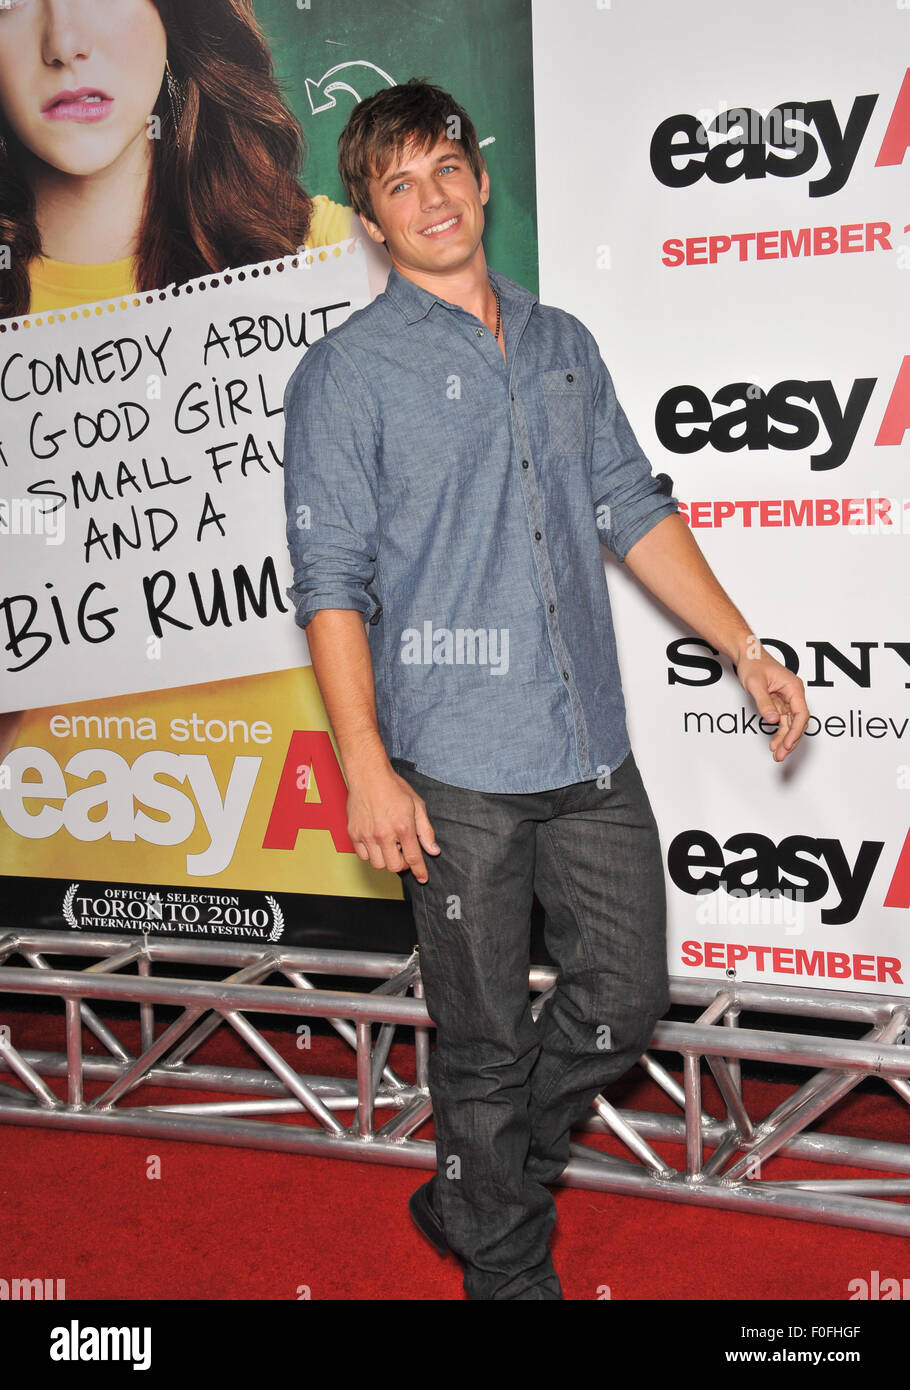 LOS ANGELES, CA - SEPTEMBER 13, 2010: Matt Lanter at the premiere of 'Easy A' at Grauman's Chinese Theatre, Hollywood. Stock Photo